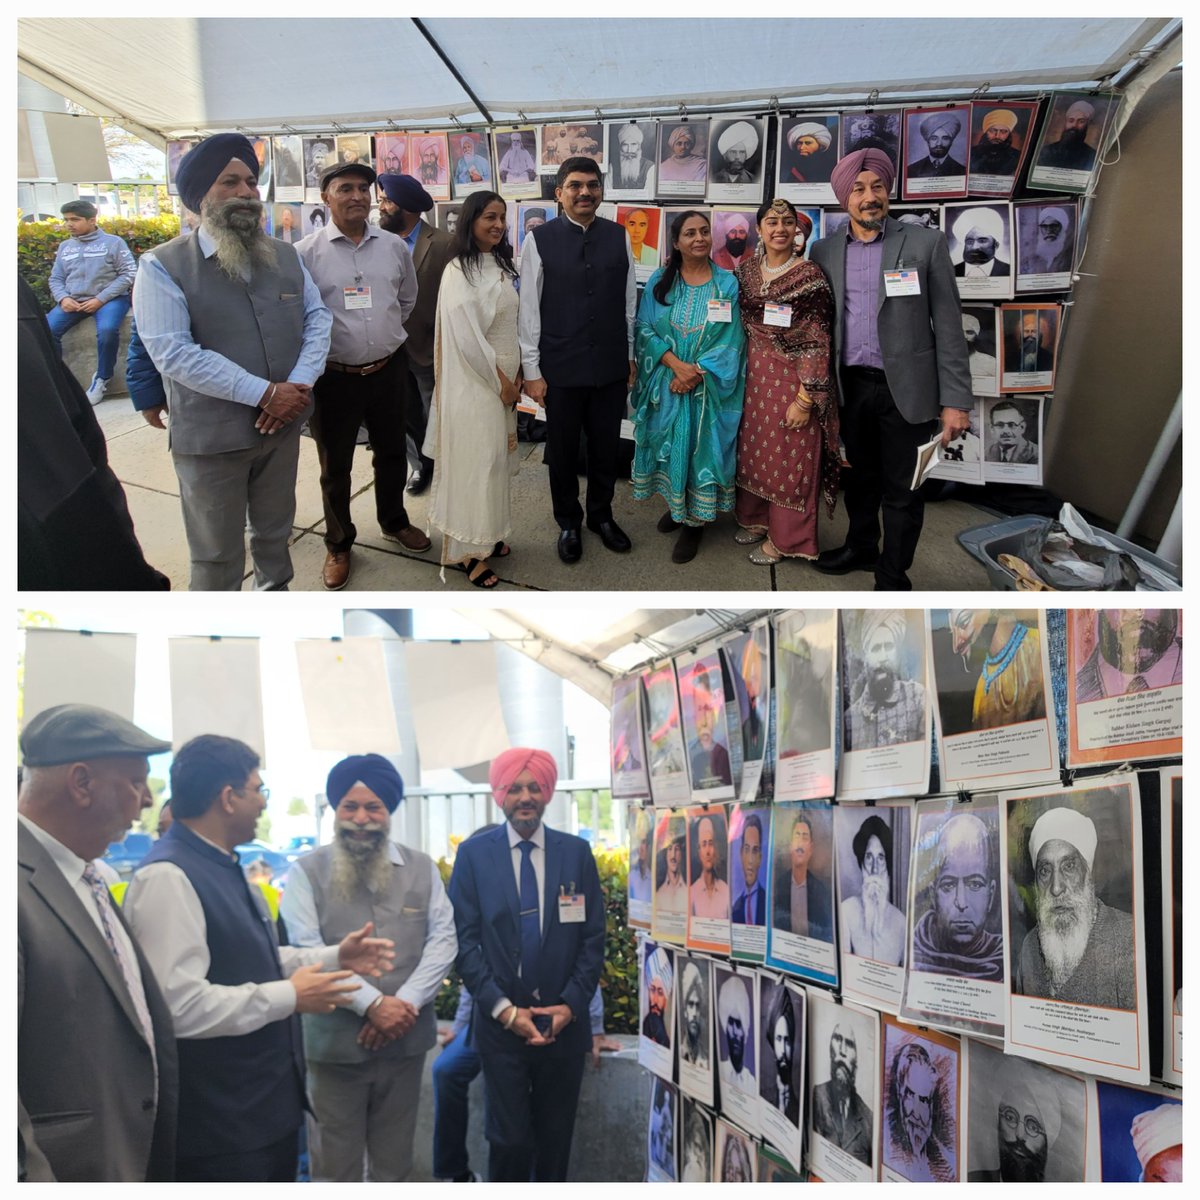 Consul General Dr. K. Srikar Reddy paid tribute to the Gadar Martyrs at the 22nd Annual Gadar Commemorative Function hosted by the Indo American Heritage Forum in Fresno. He emphasized the importance of the Gadar Movement and the sacrifices of its martyrs. President Navdeep Singh…